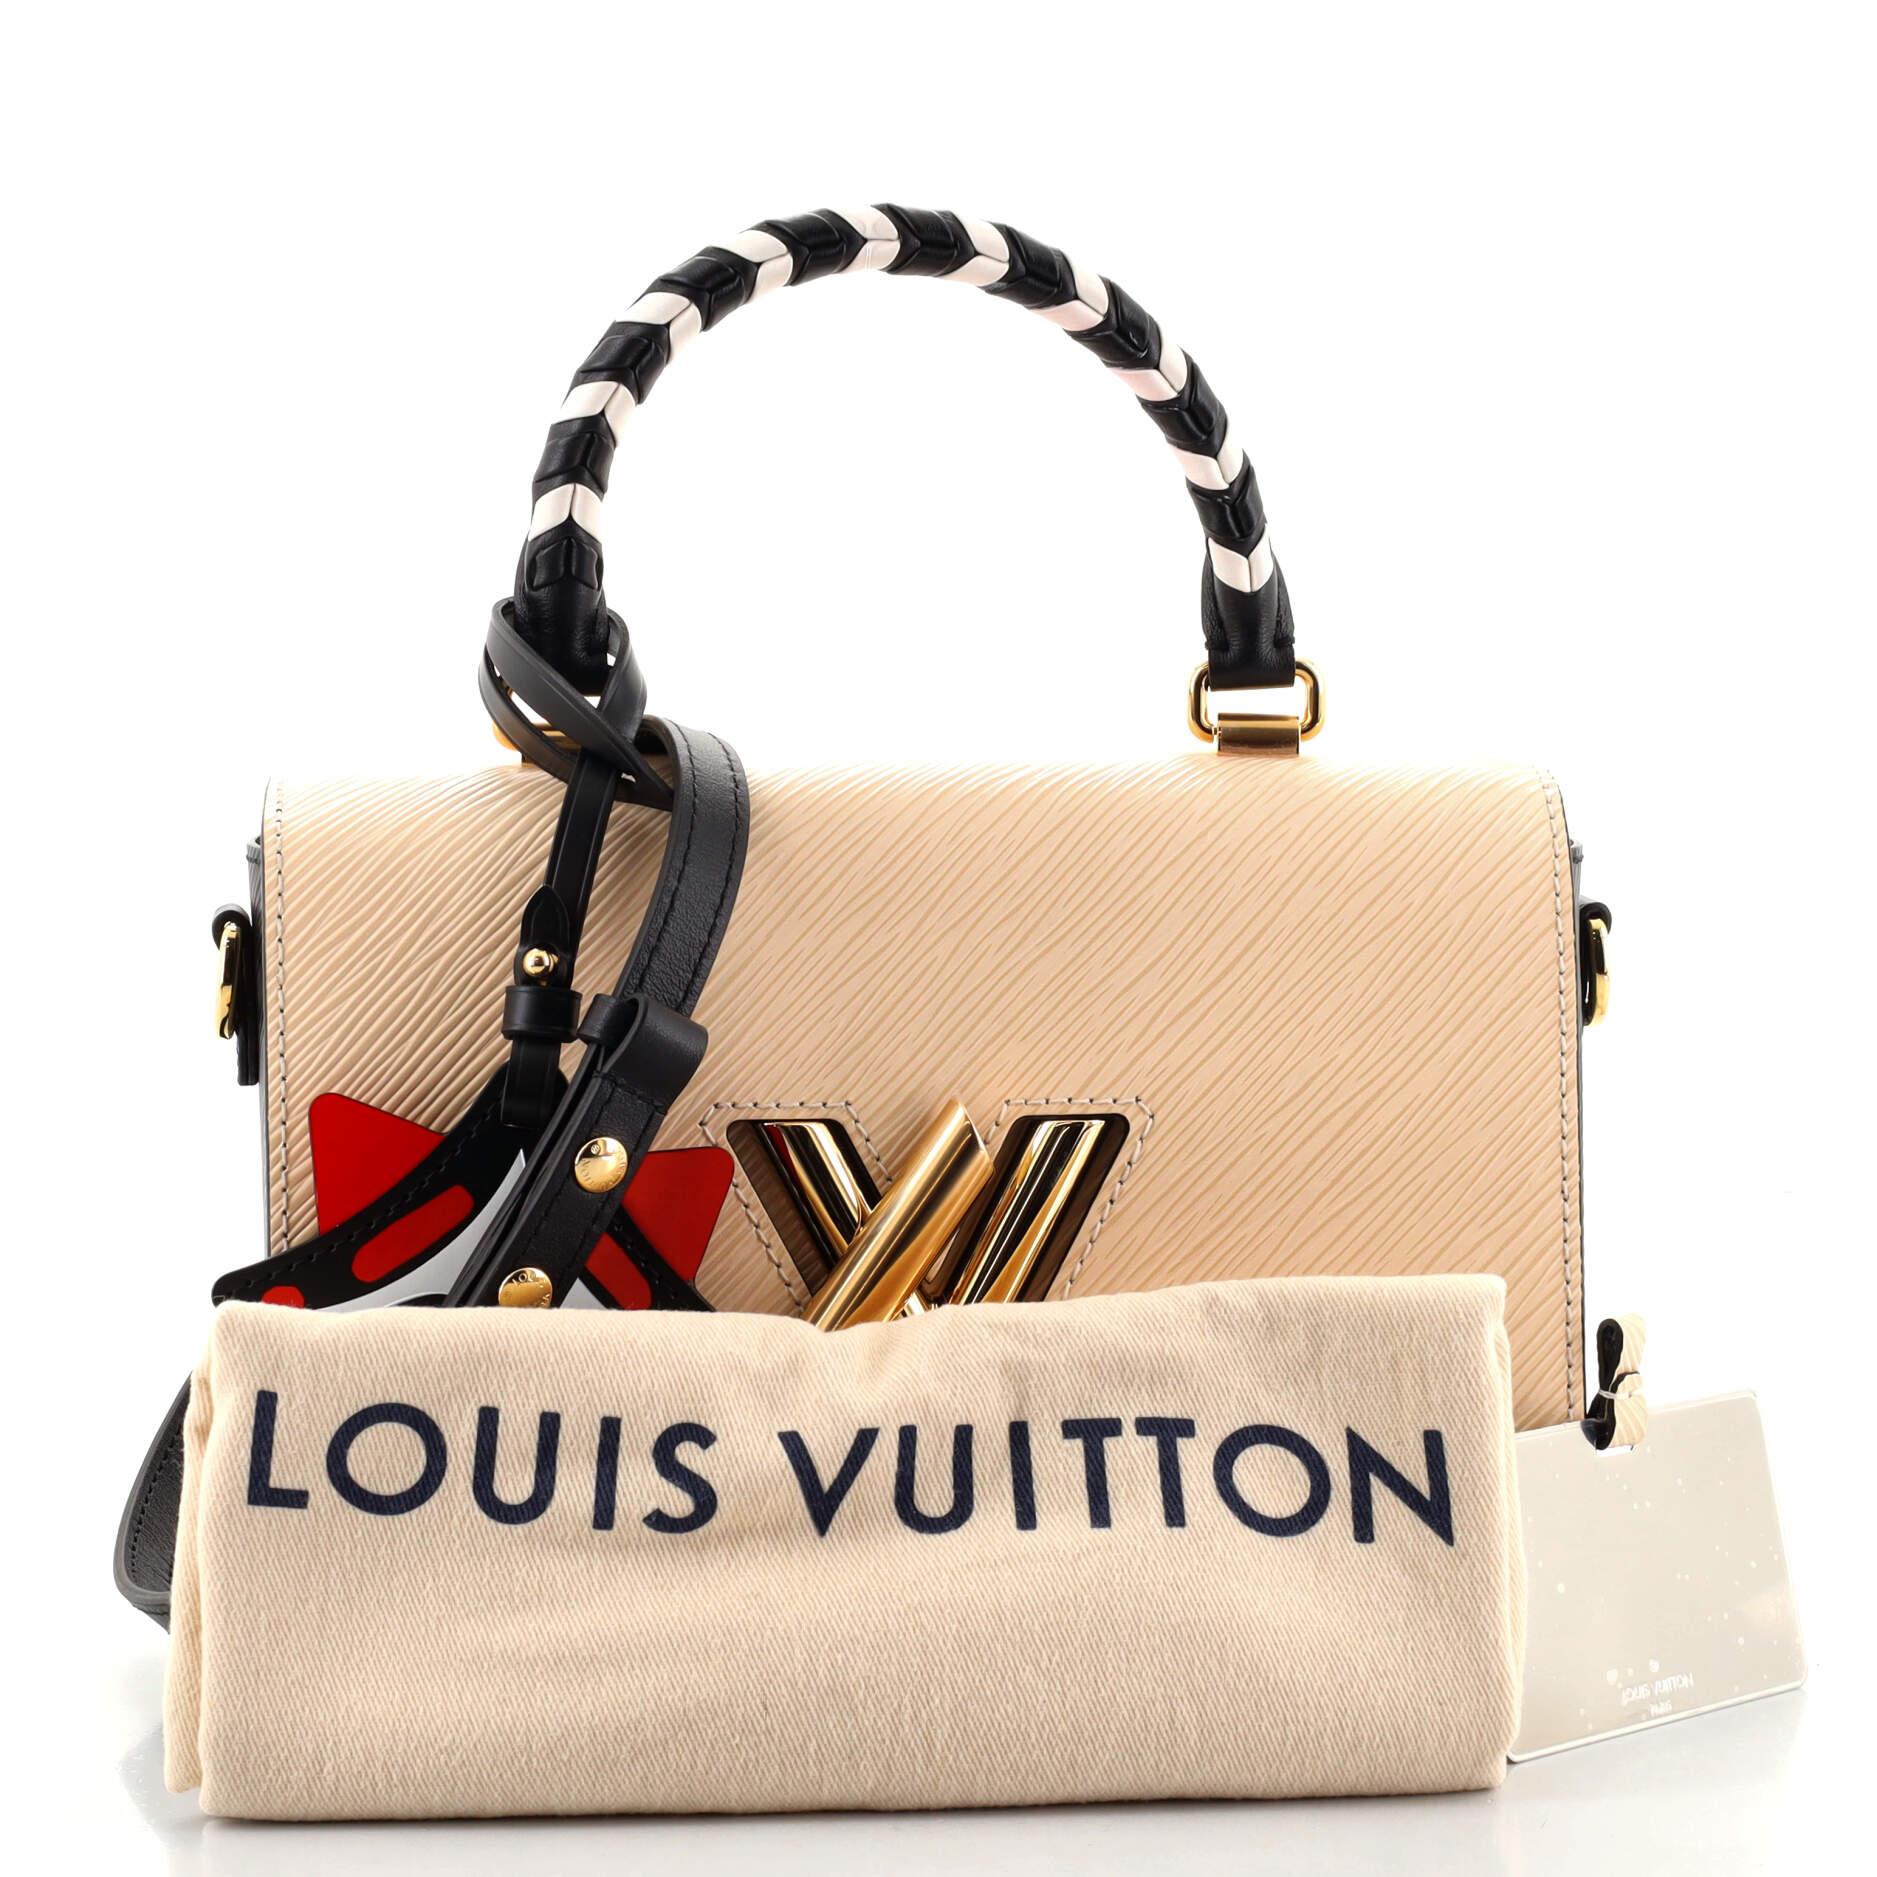 Louis Vuitton Date Code Factory chart for bagcharms, key holders, jewelry  and shoes